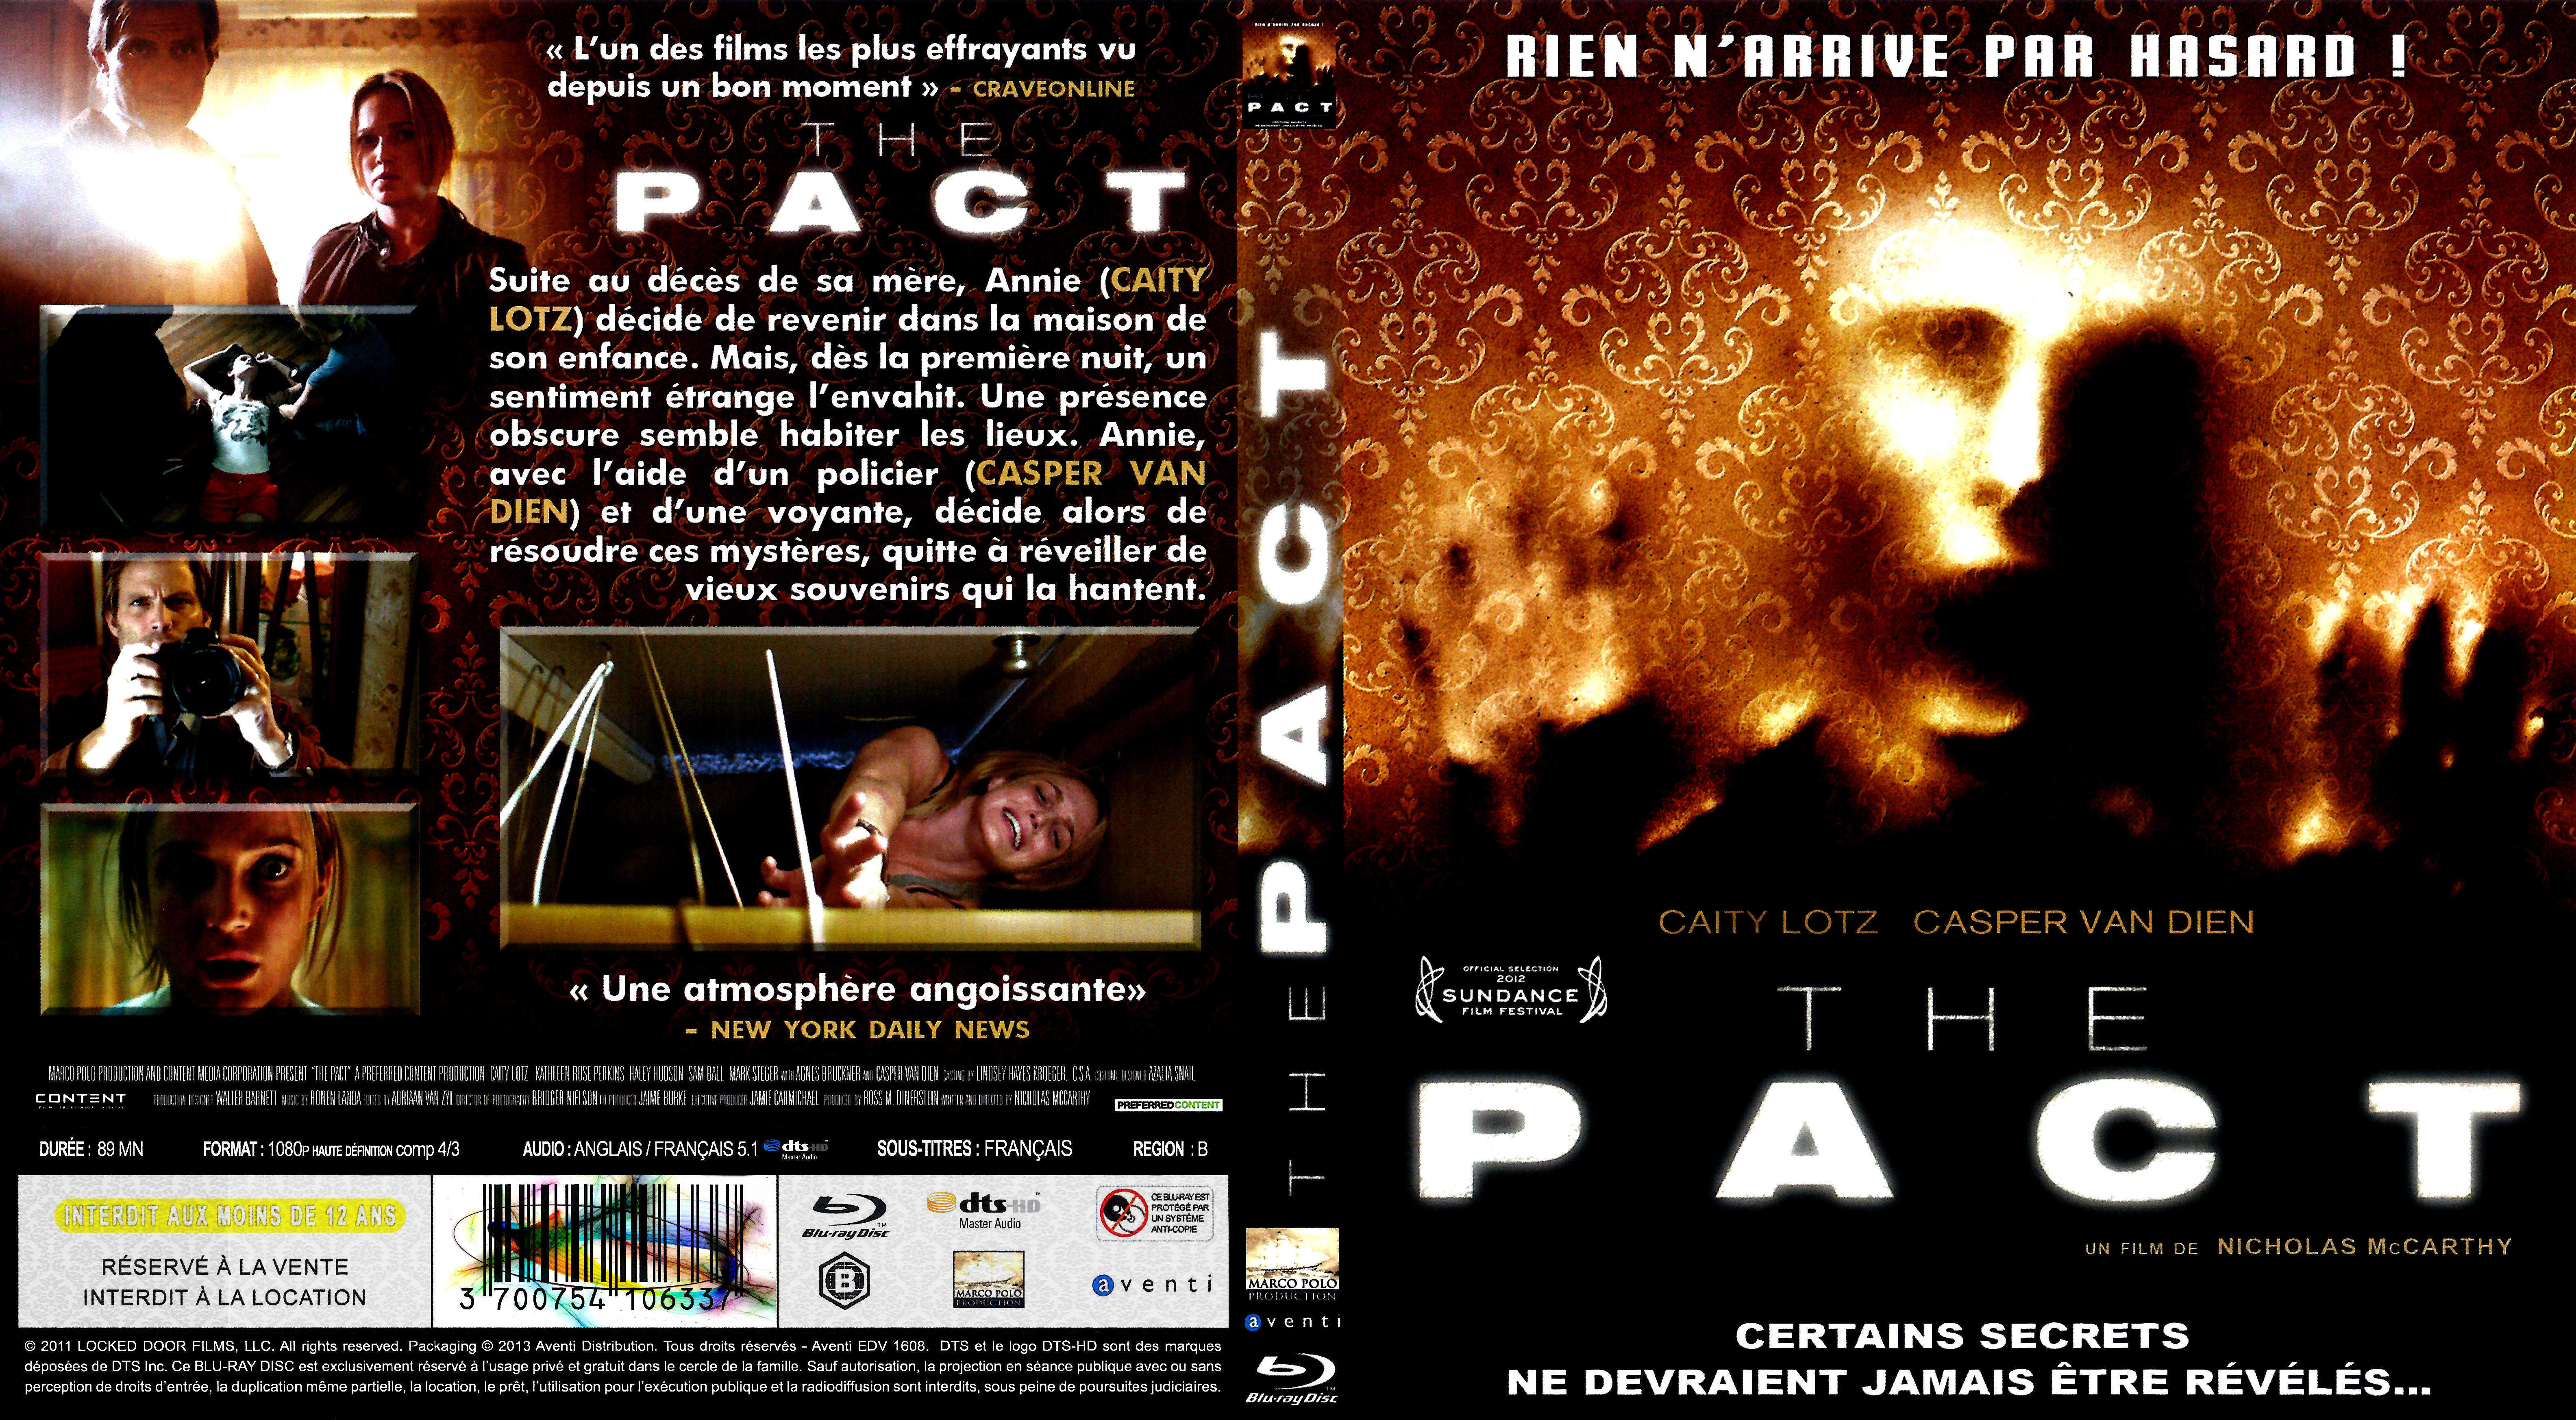 Jaquette DVD The pact (BLU-RAY) 